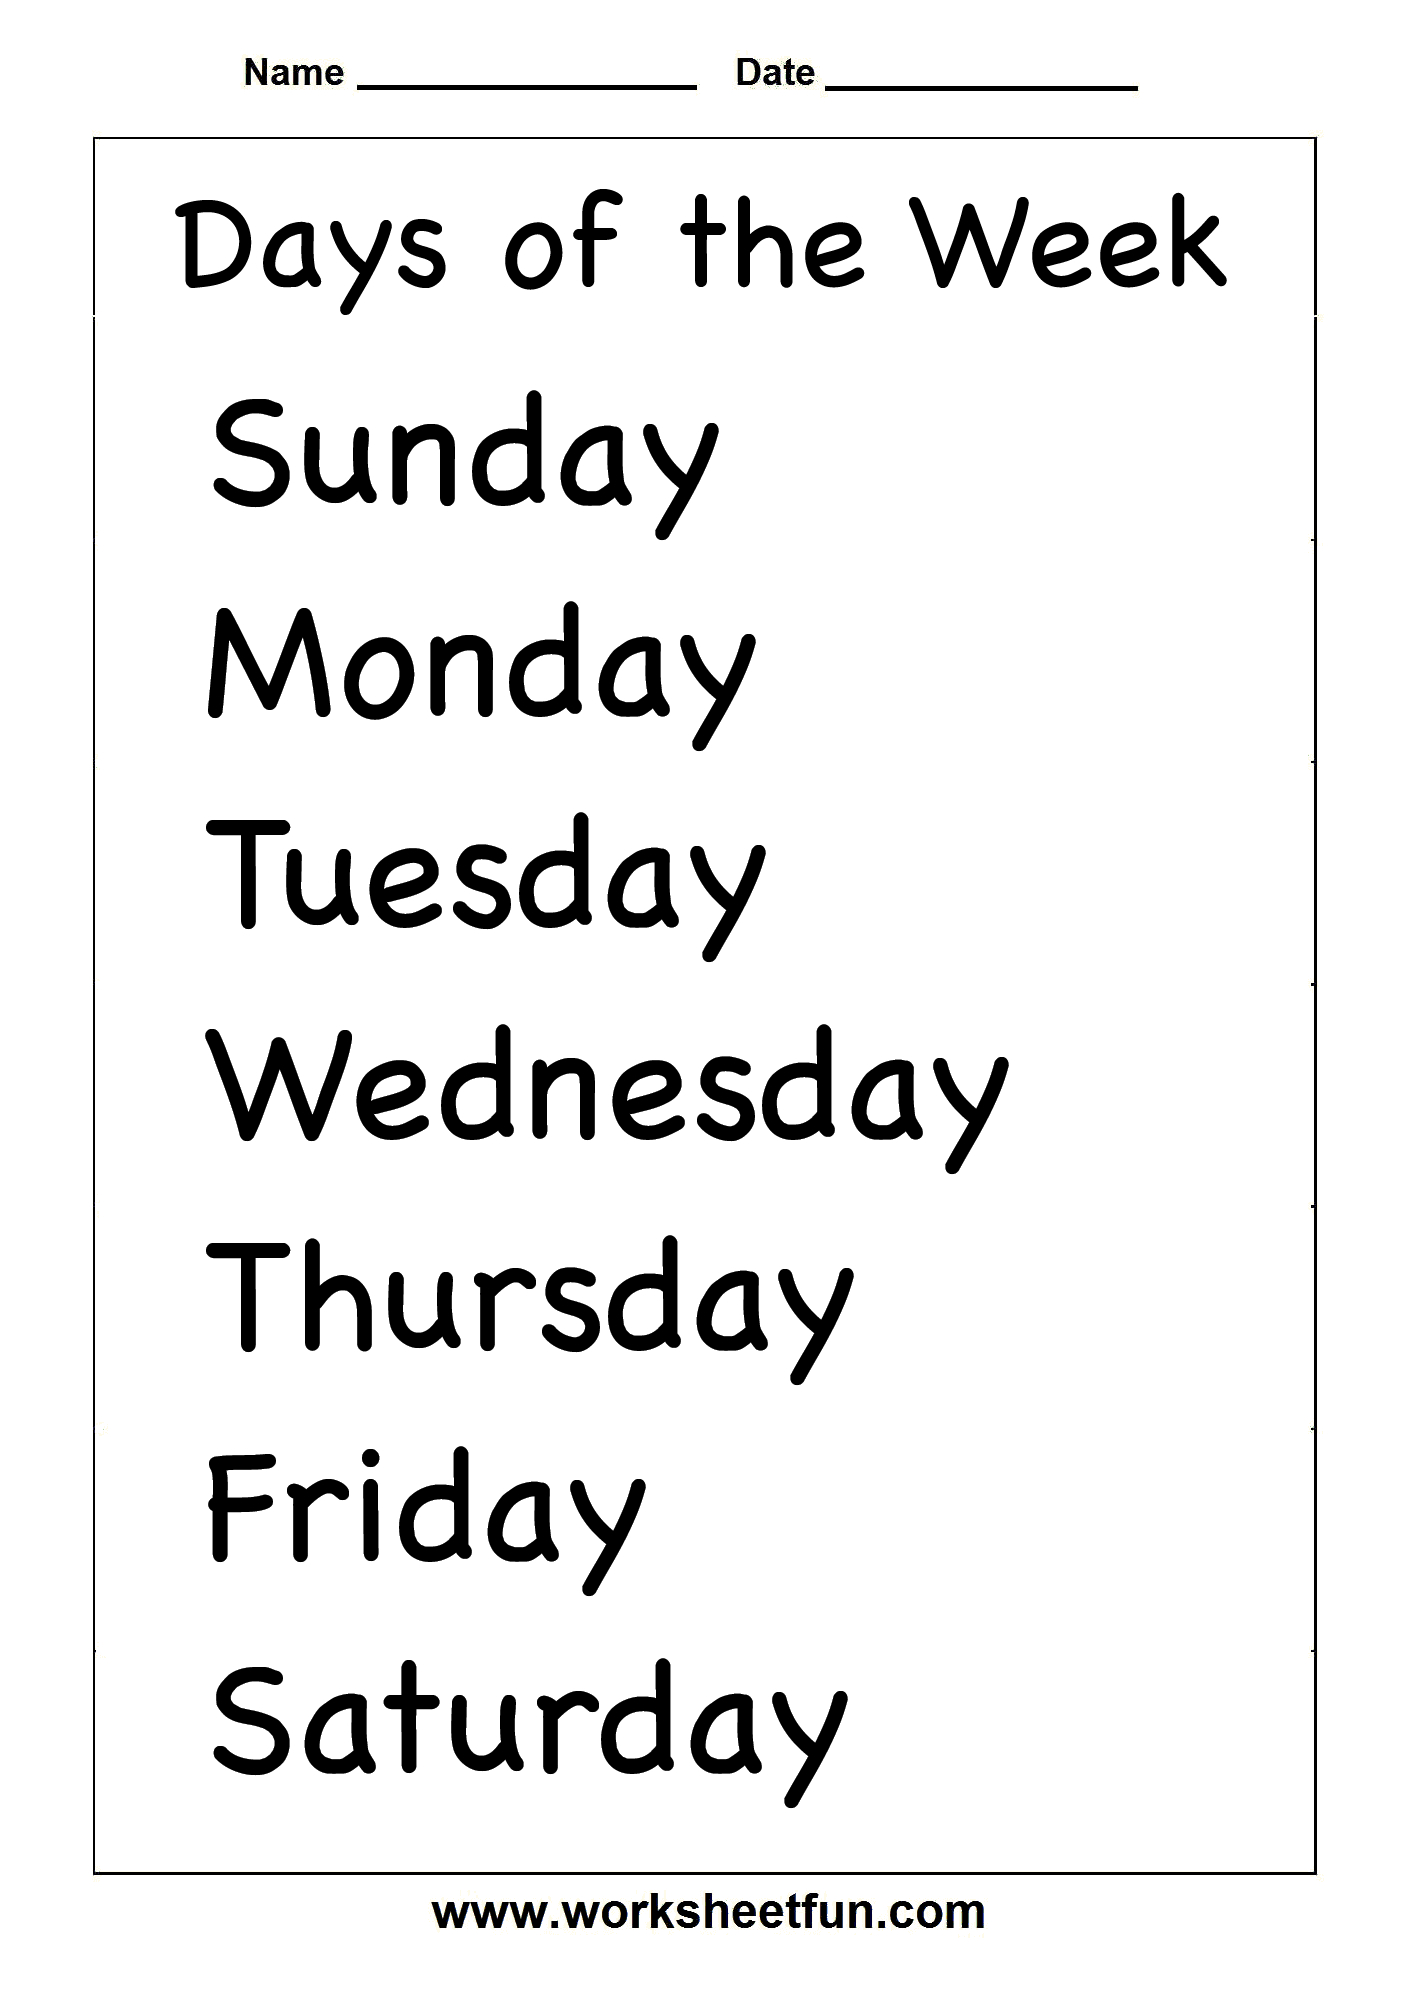 Days Of The Week – Two Worksheets / Free Printable Worksheets - Free Printable Days Of The Week